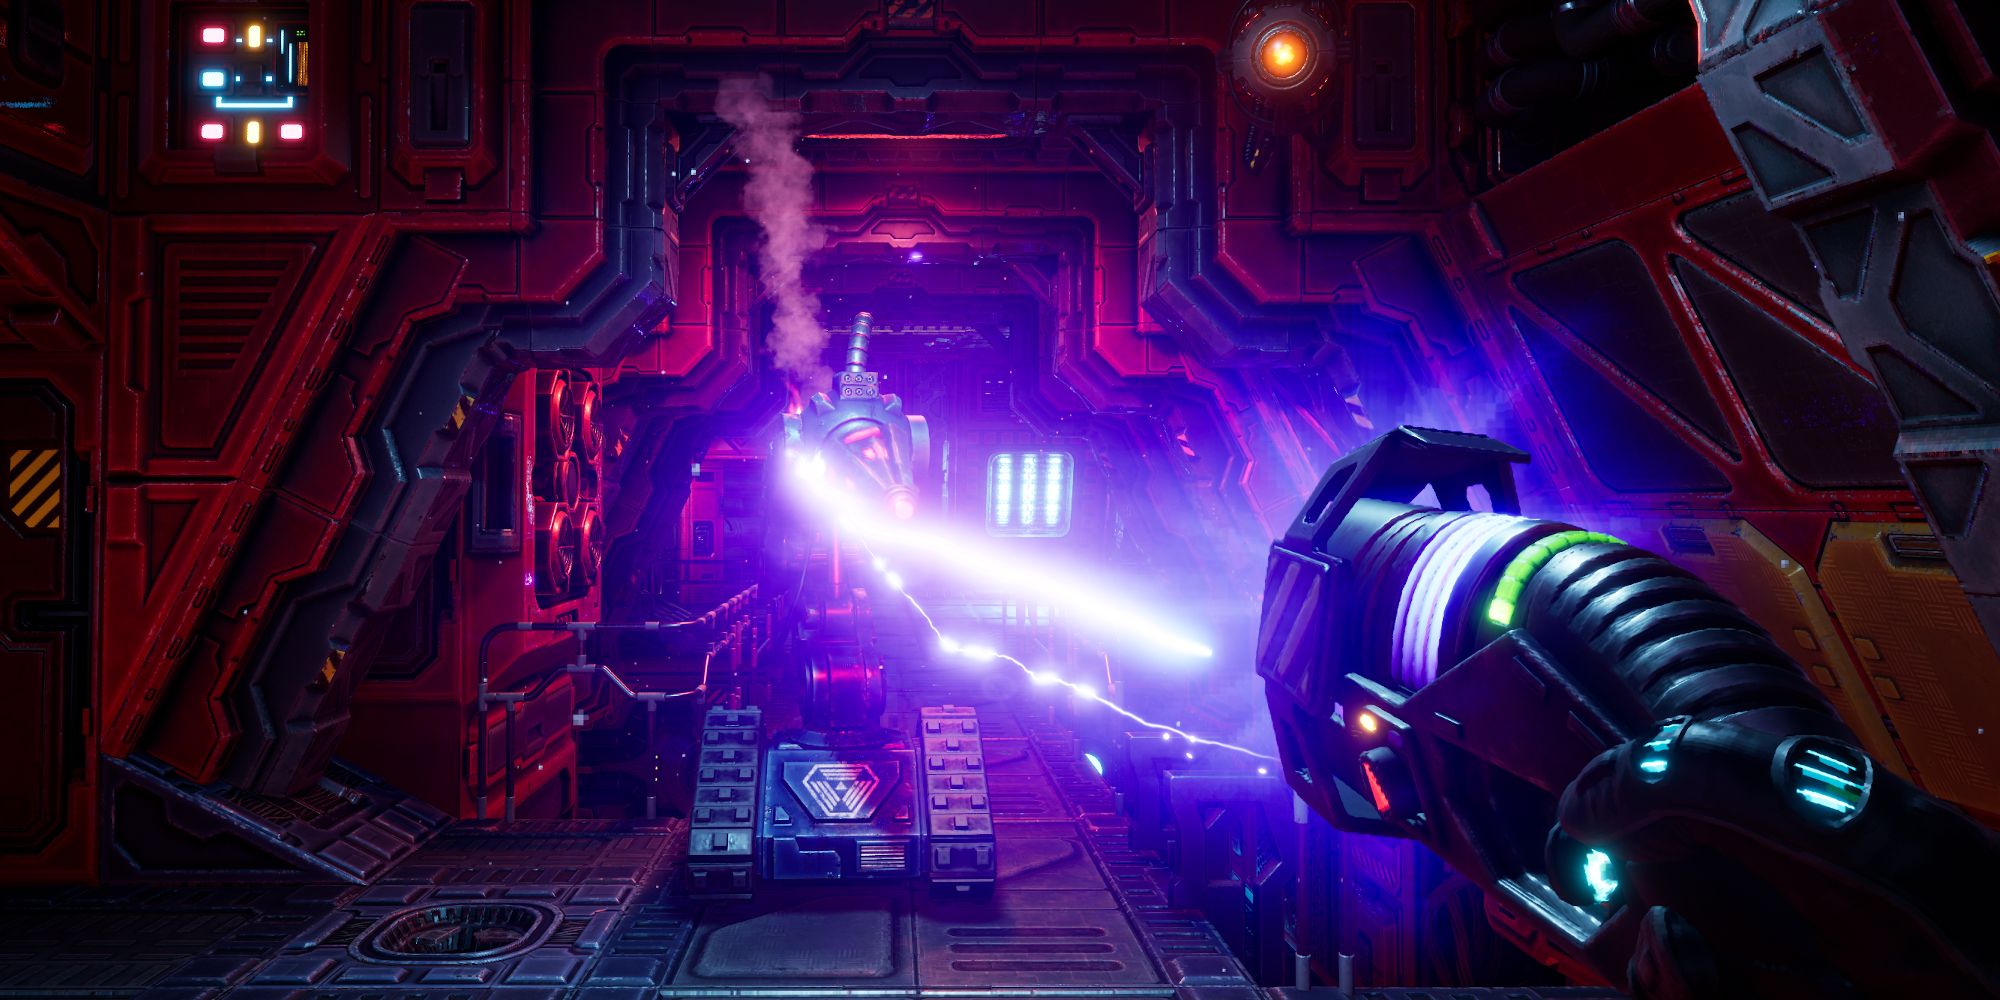 Screenshot of System Shock remake shows FPS view of player using an eletric pistol against a large laser moving around on treads in a red metal hallway.